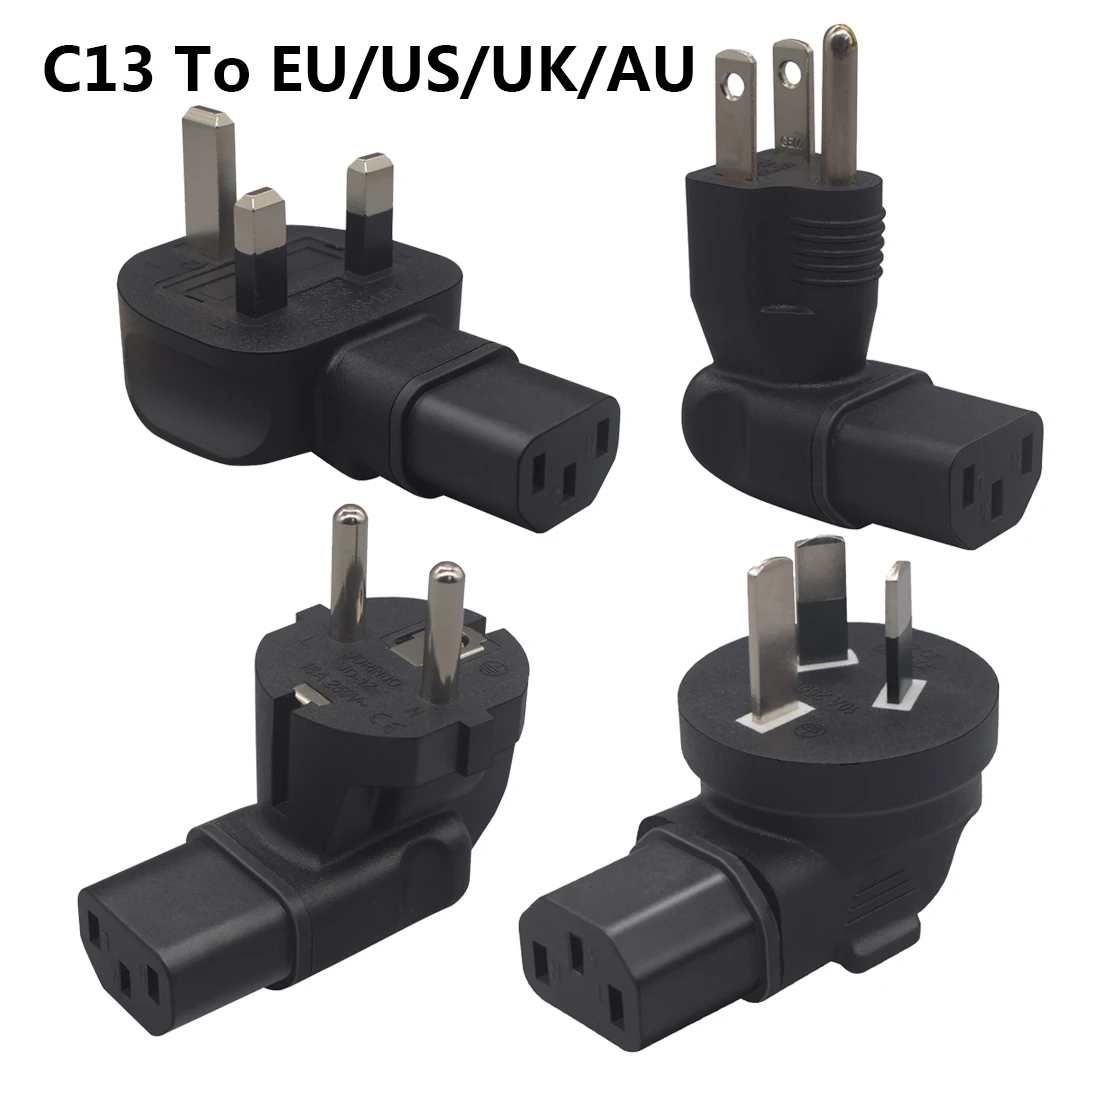 

10pcs IEC 320 C13 to US Nema 5-15P USA EU UK AU 3 Prong Euro 4.8mm AC Power Adapter Connector Extension Plug Socket Conversion